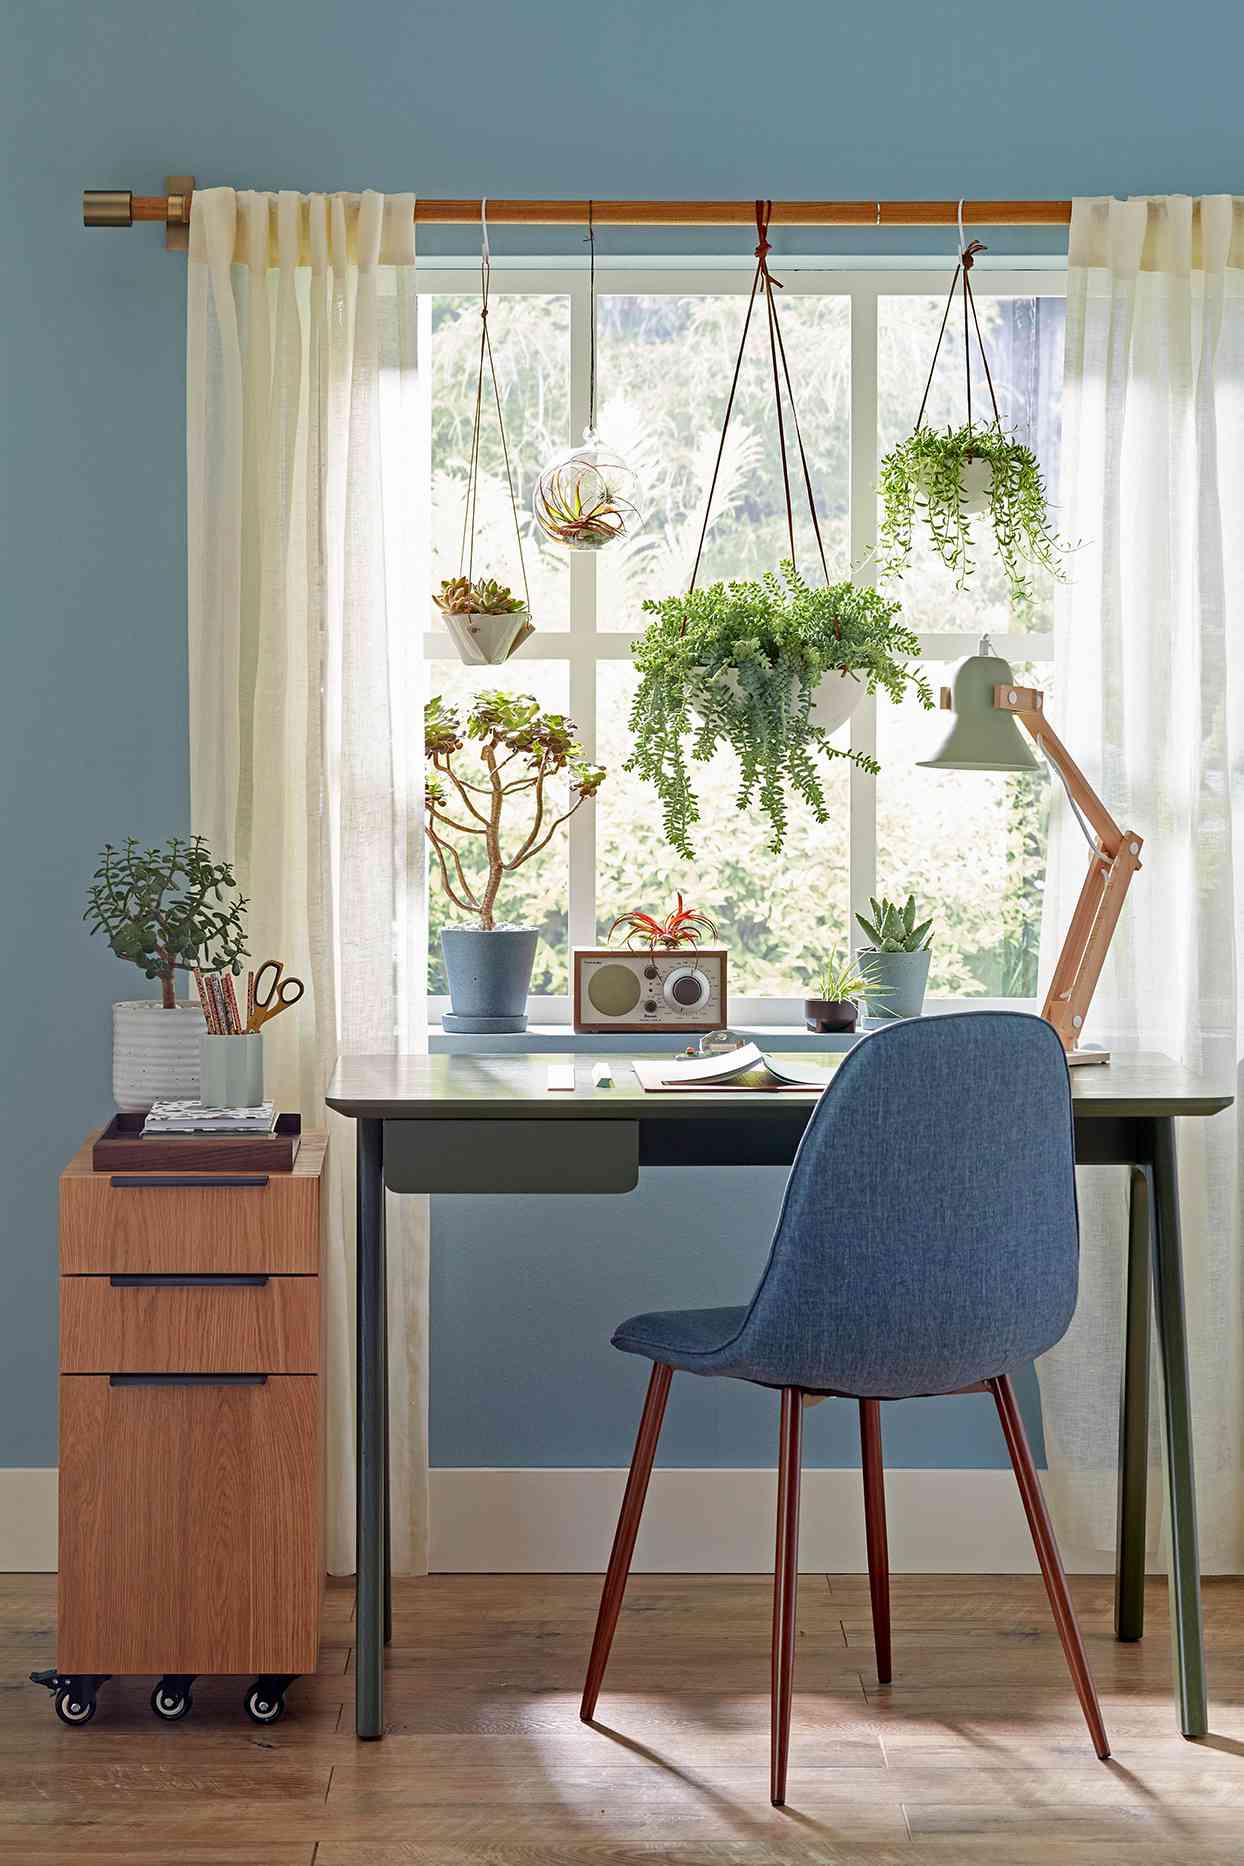 blue desk chair by window with plants